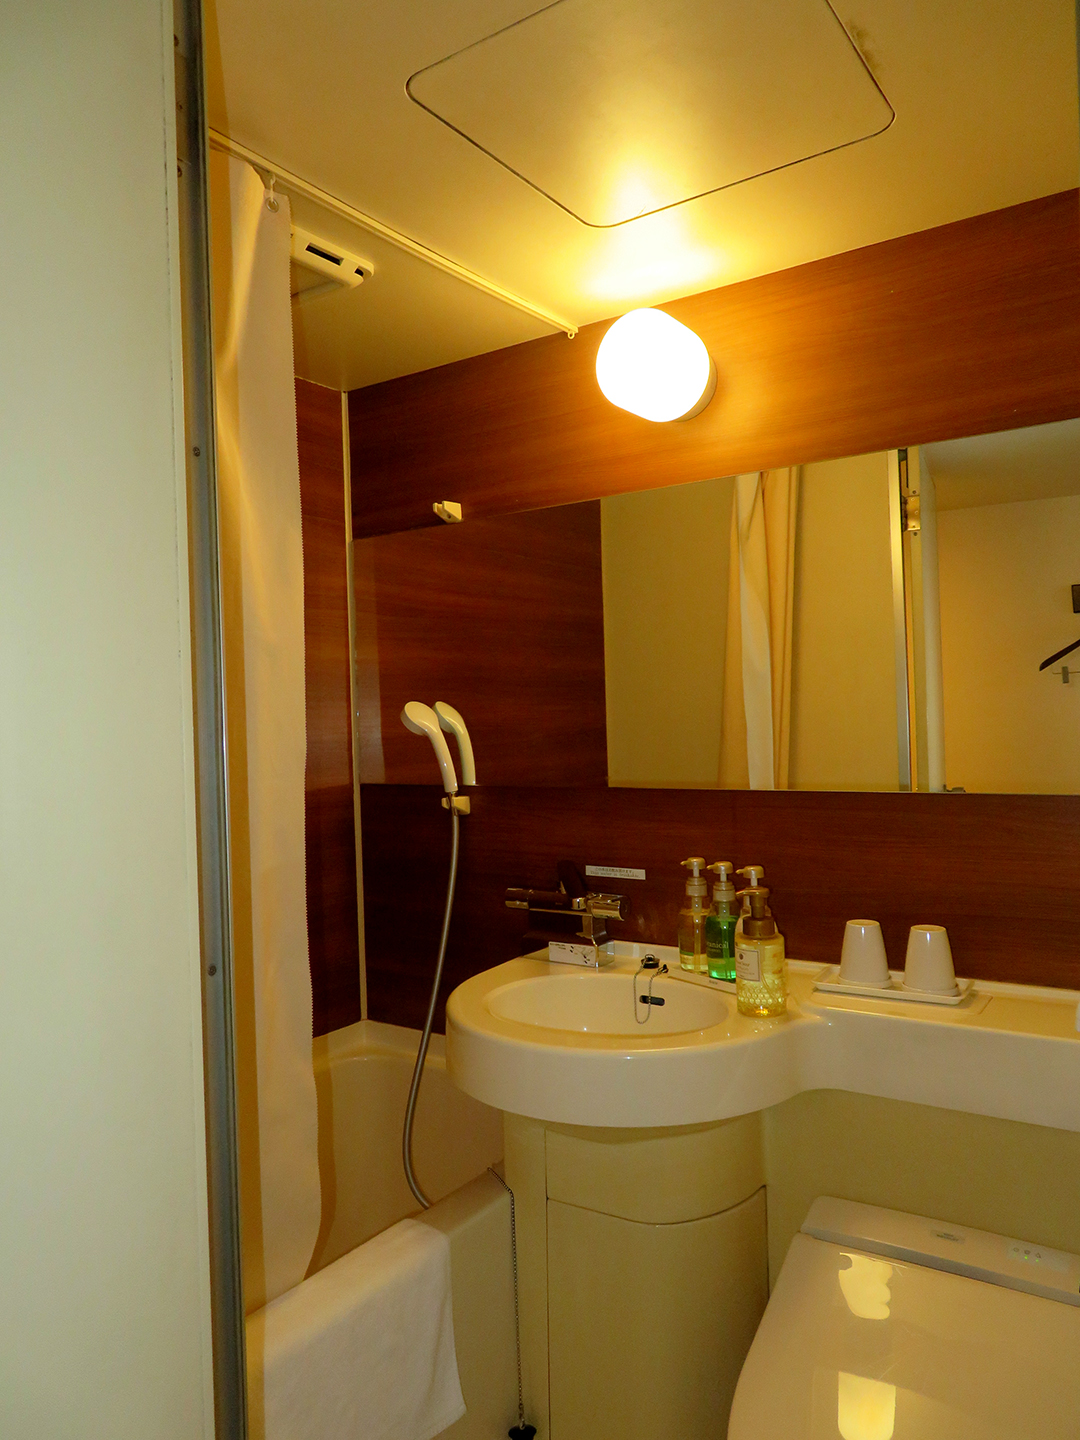 Angled view of a bathroom at Hotel Matsumoto Yorozuya showing a toilet to the right, a sink in the center, and a bathroom with a handheld shower head to the left.